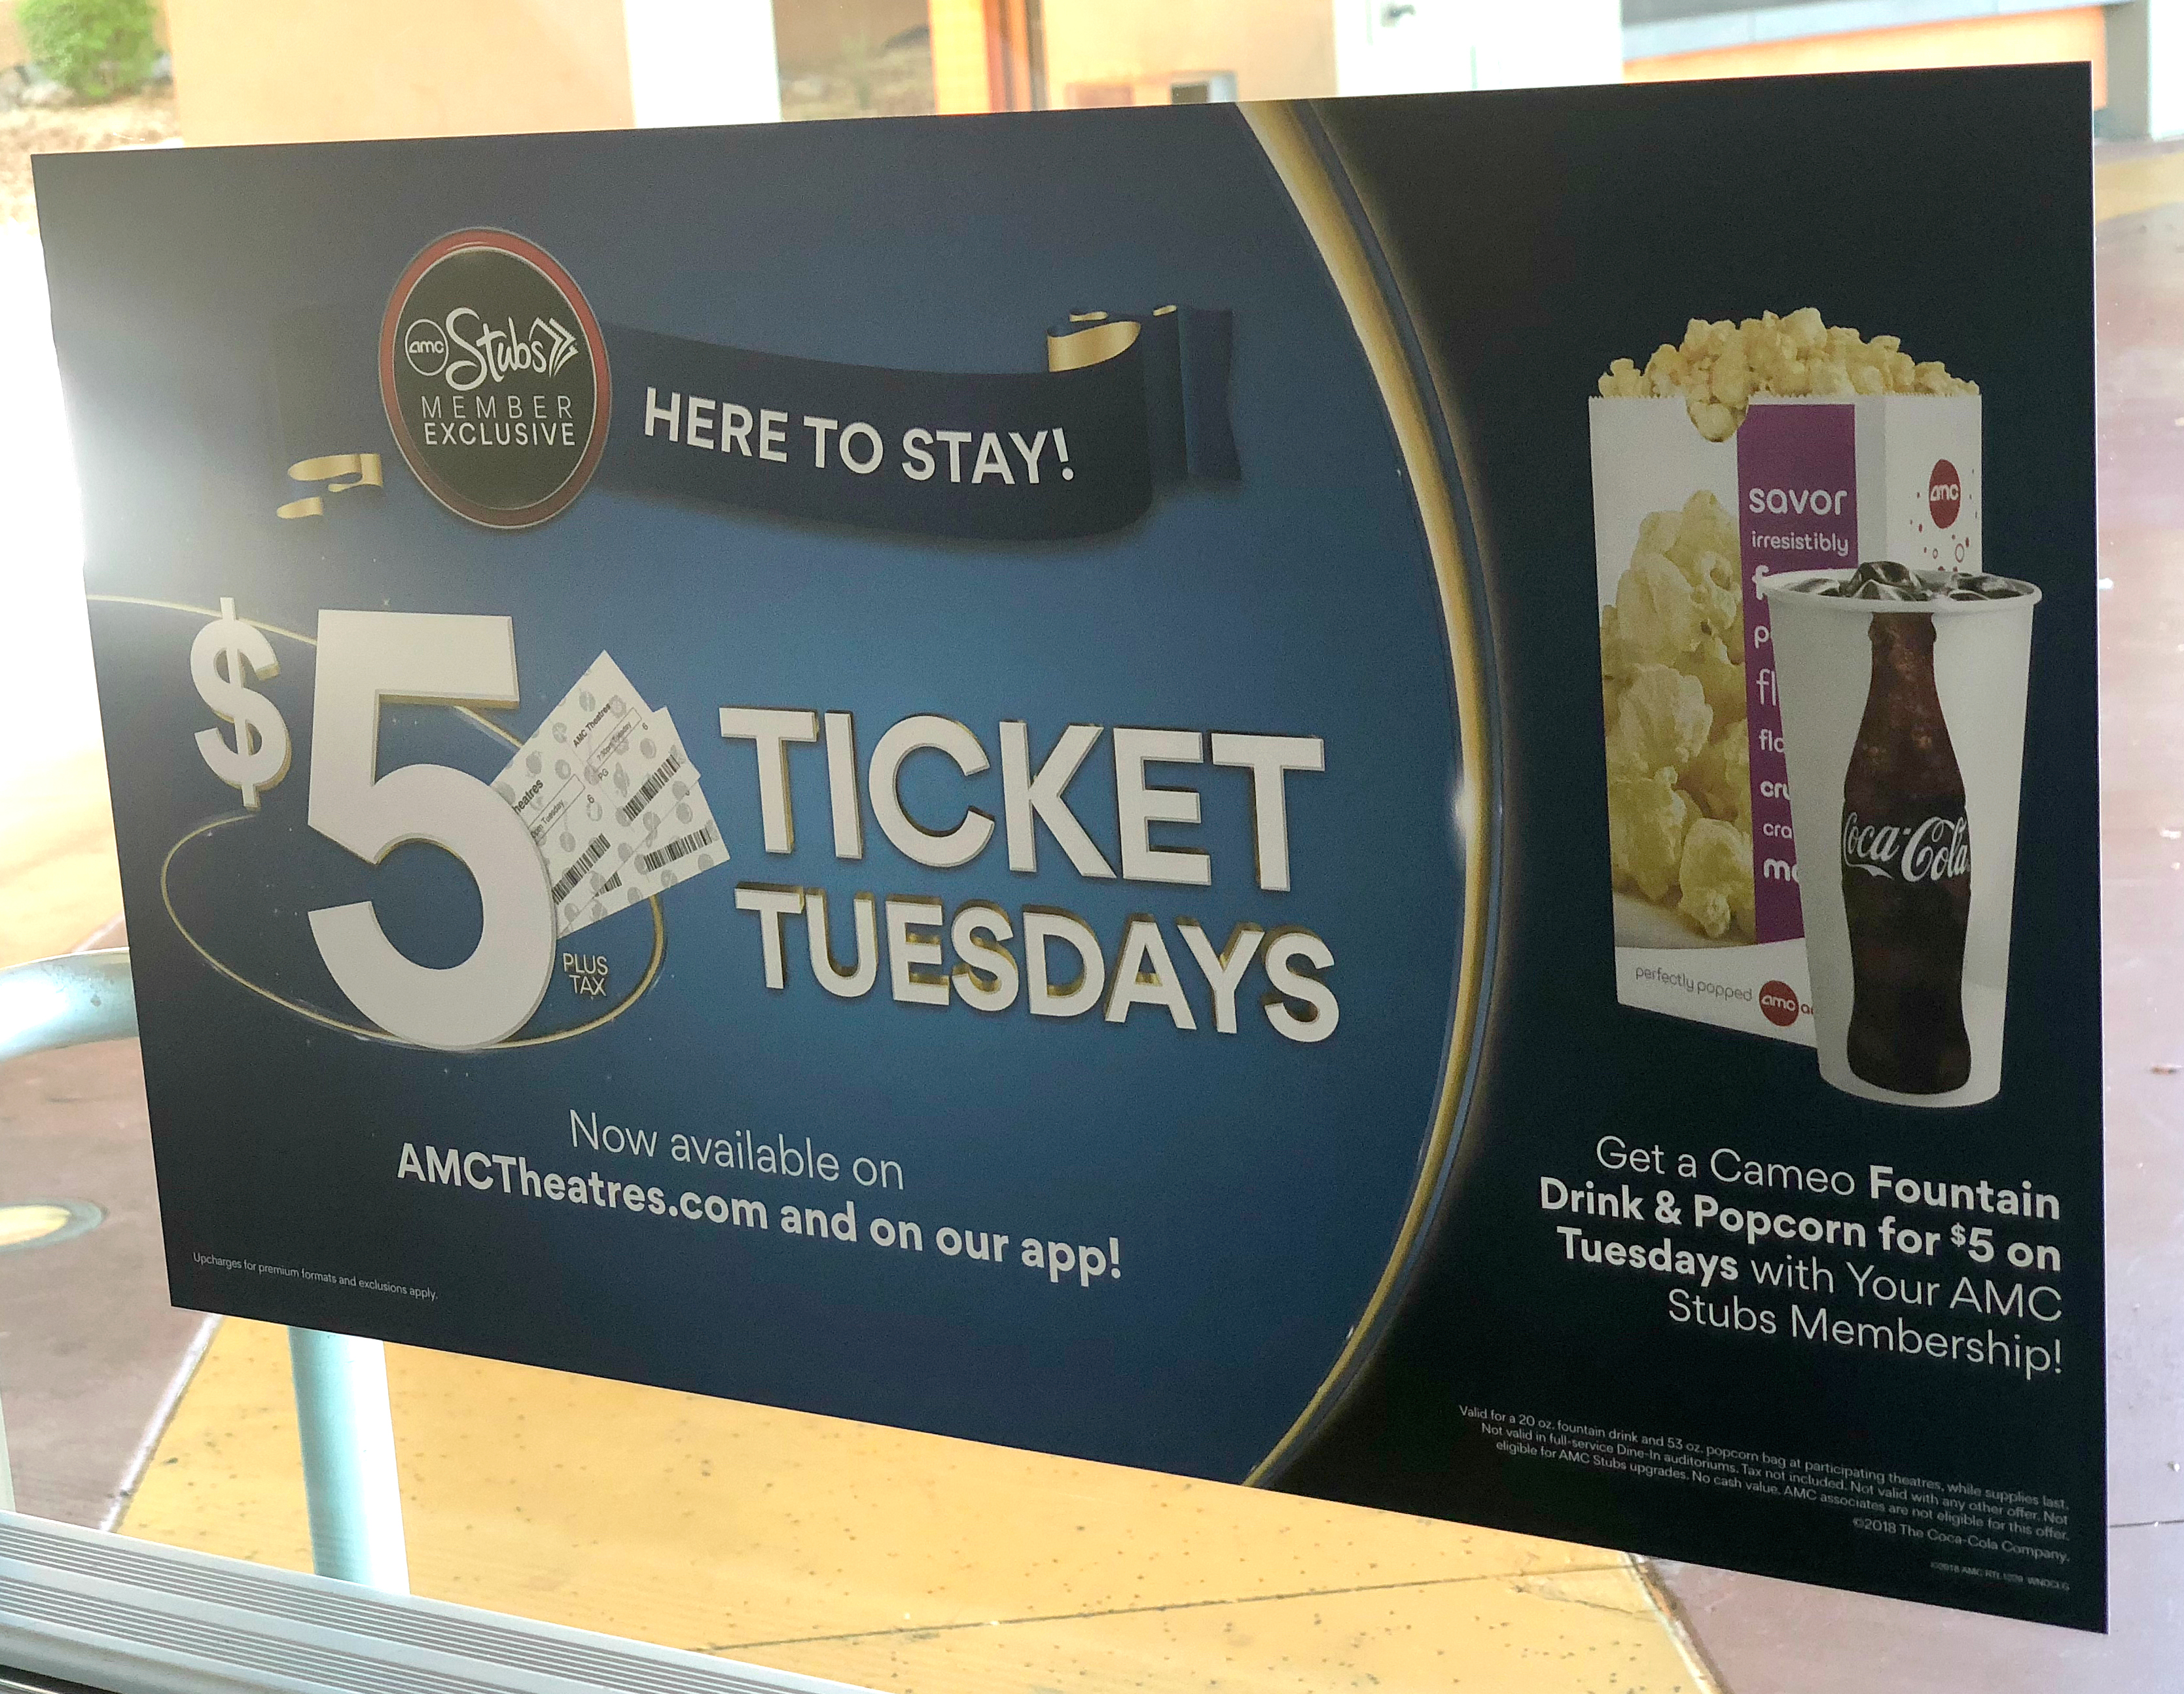 simple movie theater hacks that save money - AMC Ticket Tuesday sign